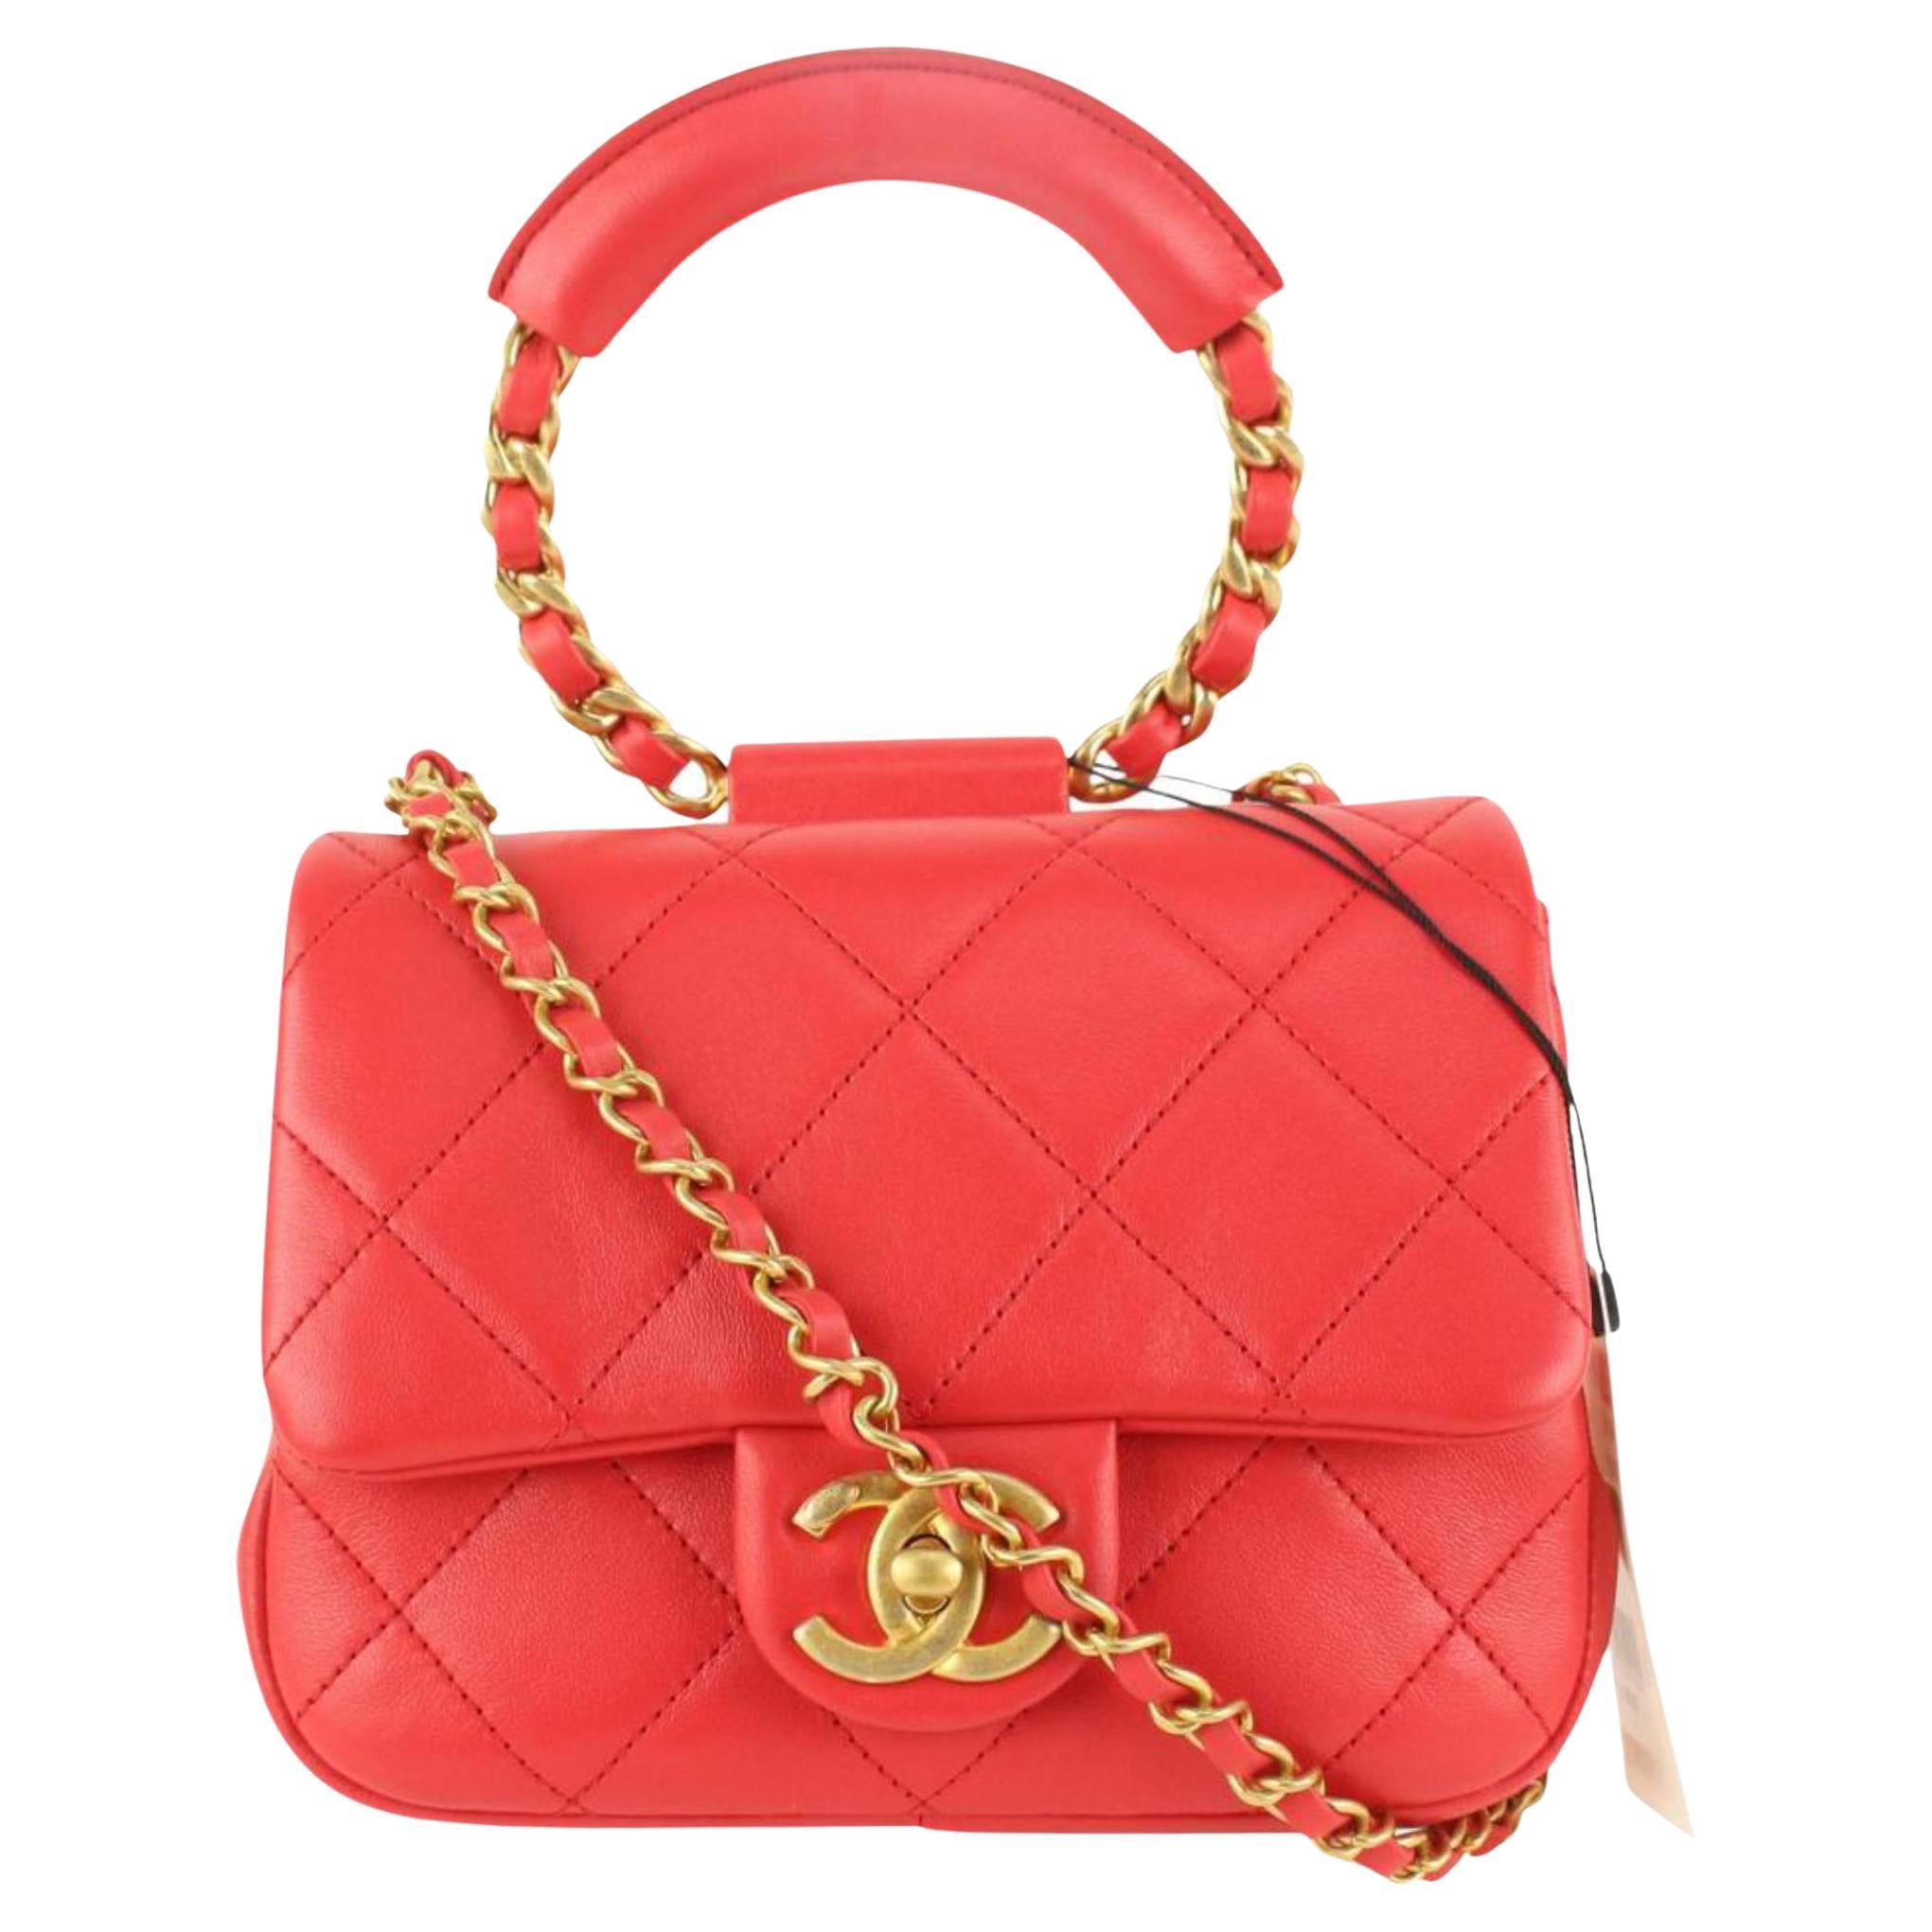 Louis Vuitton Limited Edition Red Quilted Leather New Wave Heart Crossbody Bag 816lv